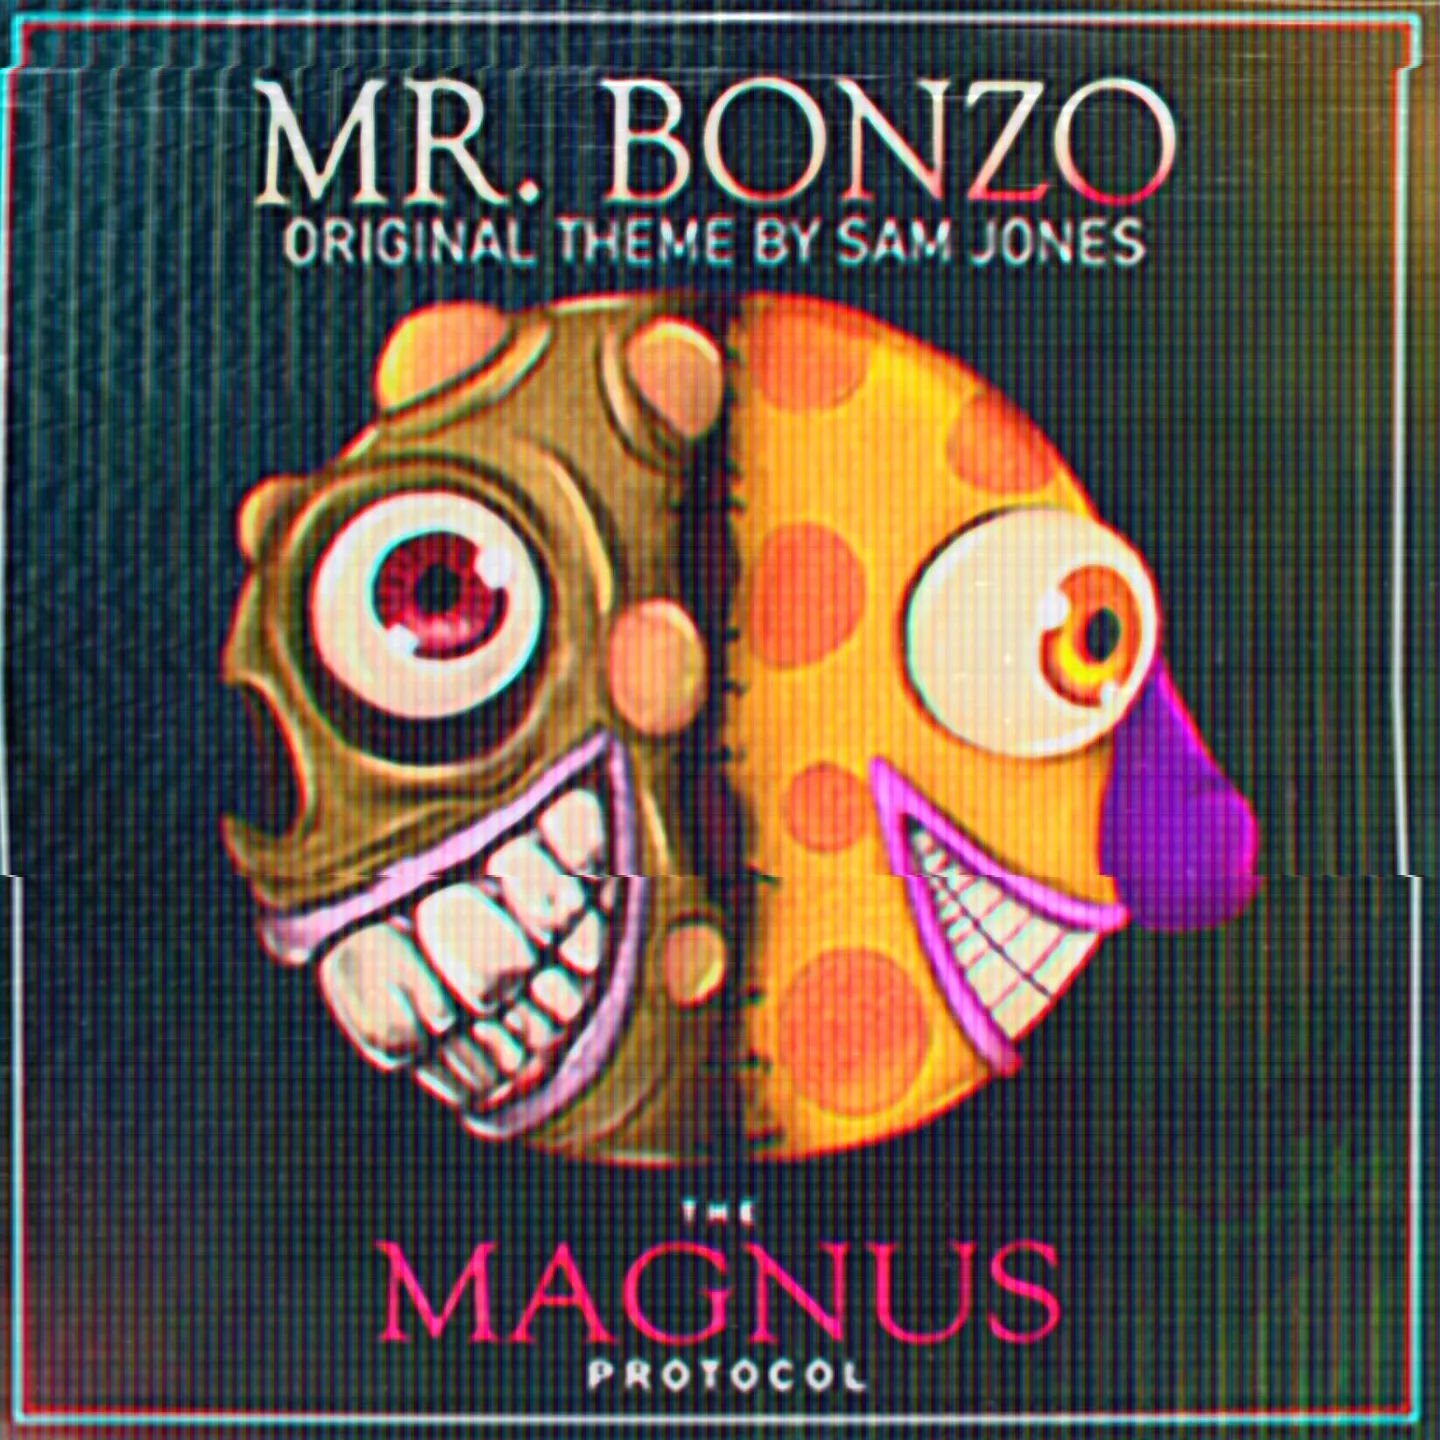 He's here to stay!

The new theme for Mr Bonzo is it now!
Enjoy as this pastiche of a children's TV theme descends into a nightmarish fever dream...

Click on the link in the bio to listen!

Huge thanks to @lucietreacher for making her usually beauti